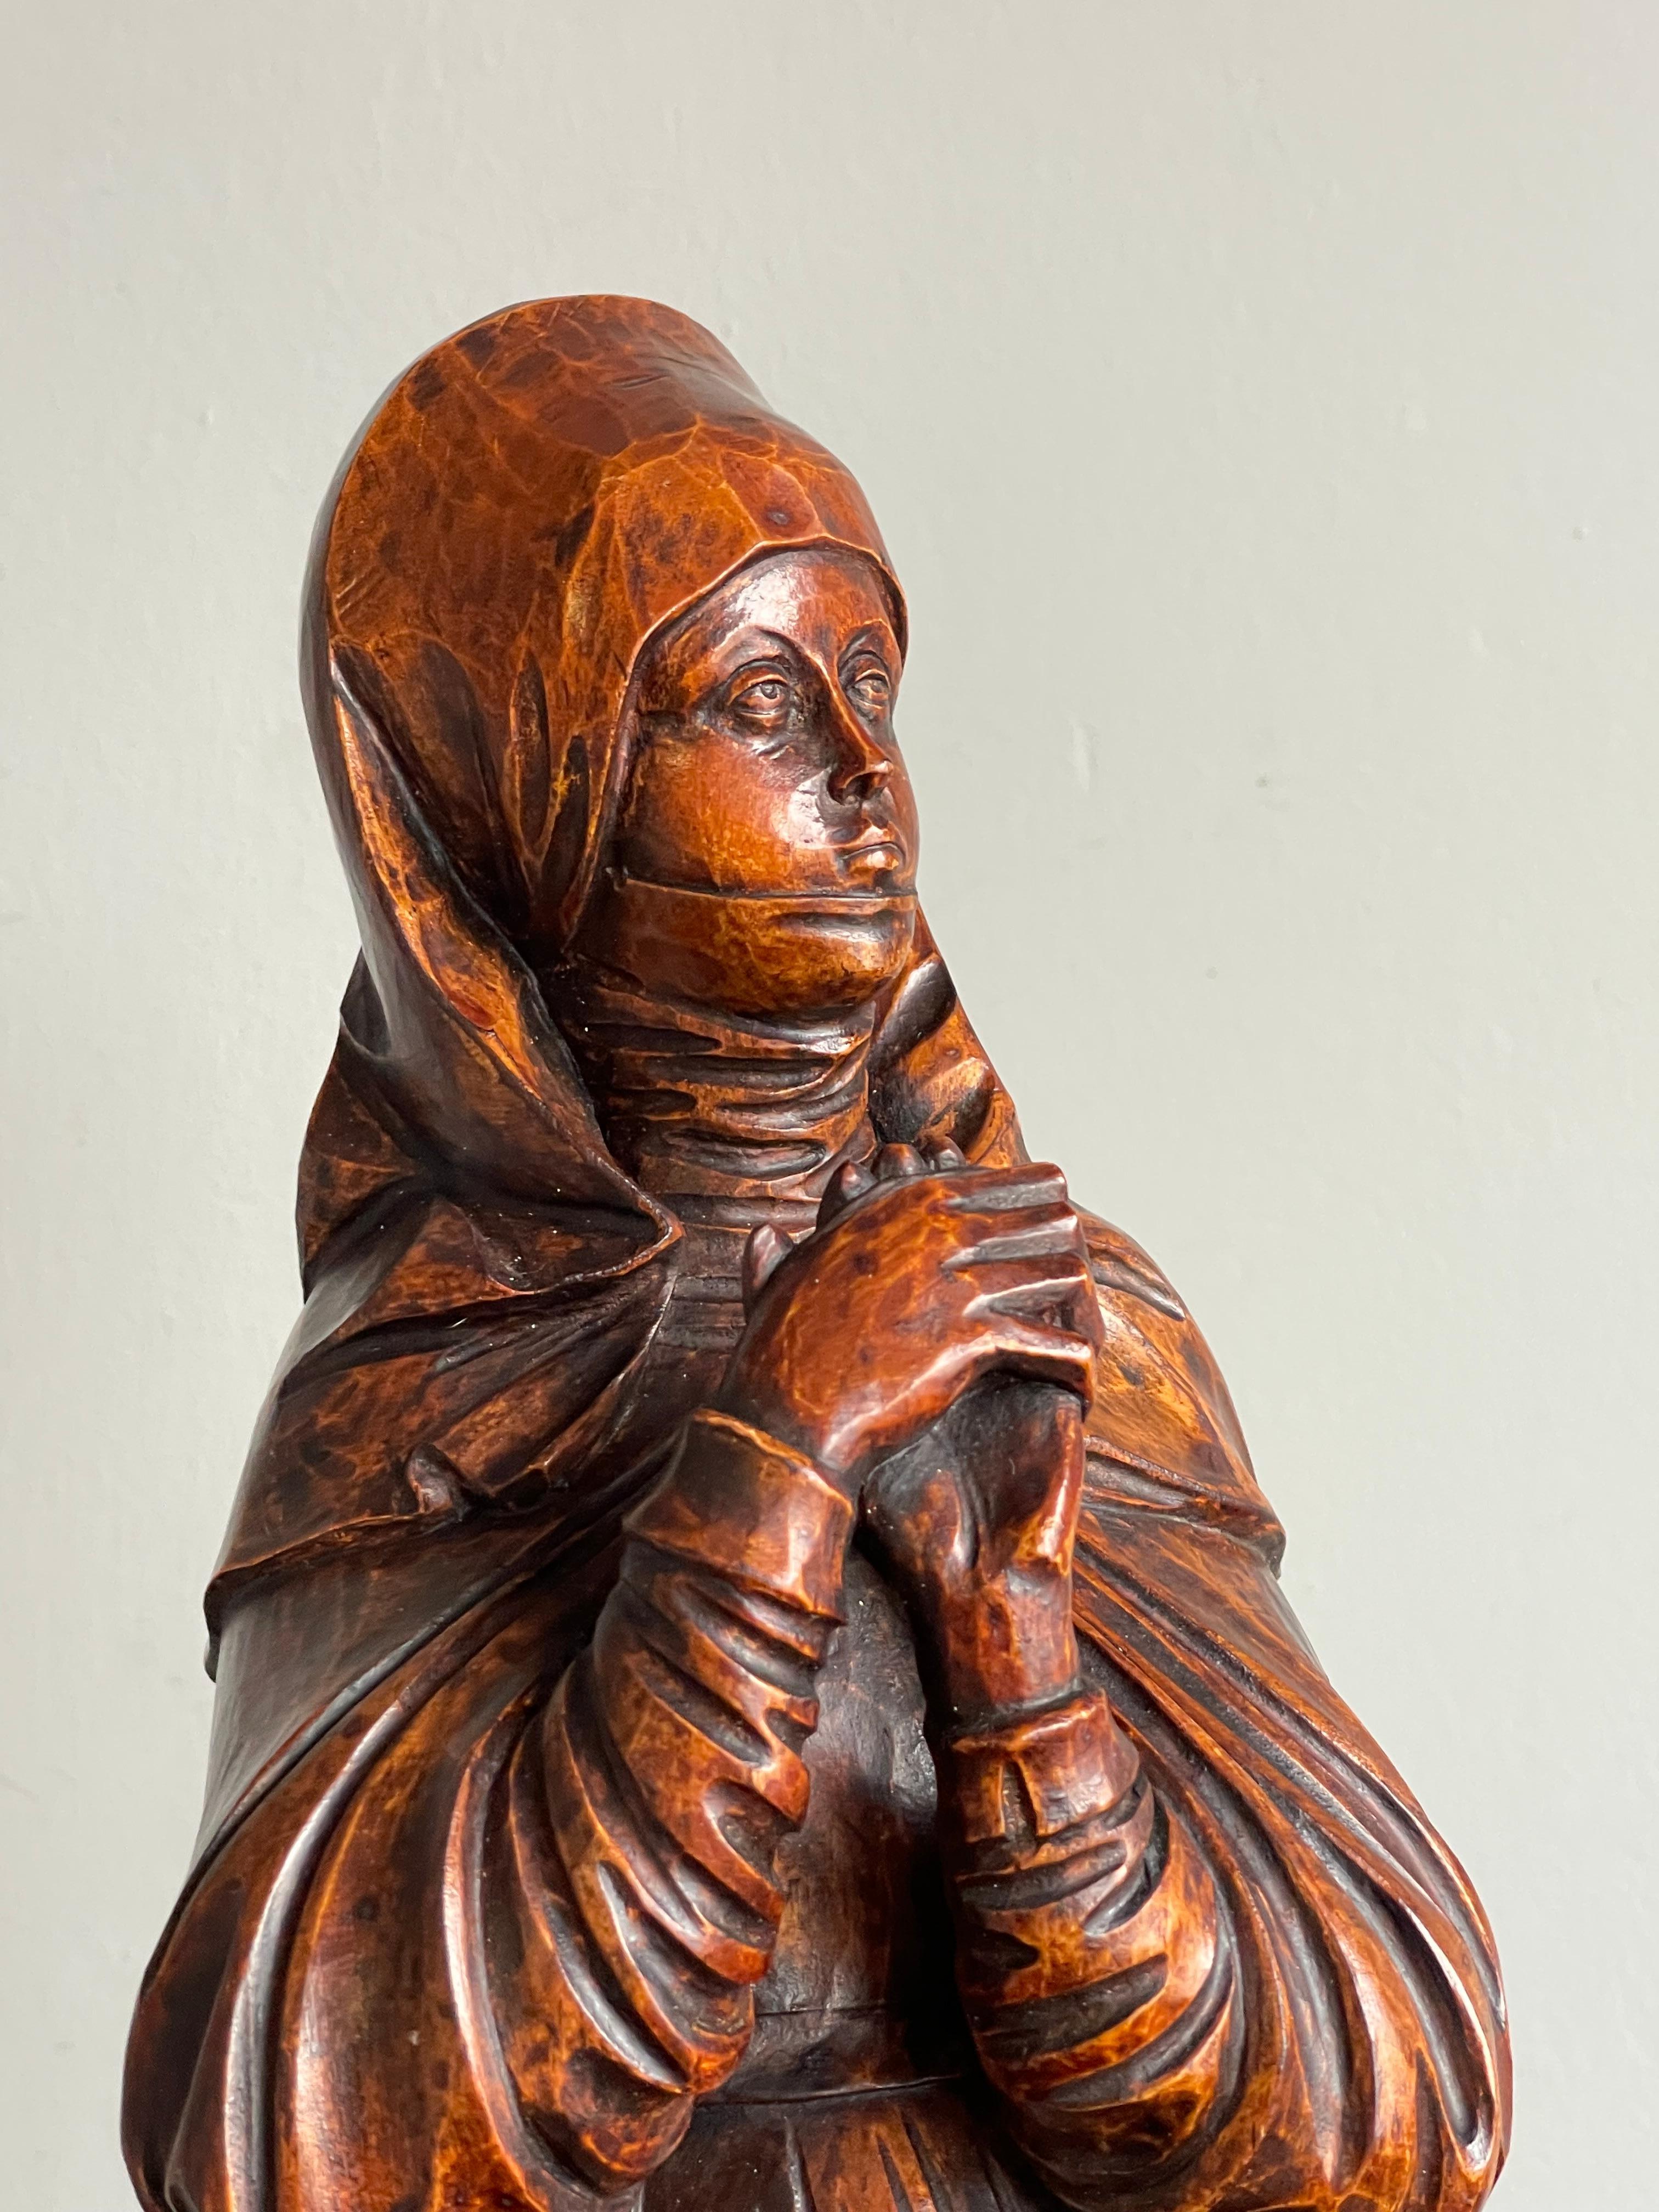 Rare pair of hand-carved works of devotional art with an amazing patina.

Saint Teresa of Ávila, born Teresa Sánchez de Cepeda y Ahumada, also called Saint Teresa of Jesus (1515-1582), was a Spanish noblewoman who chose a monastic life in the Roman